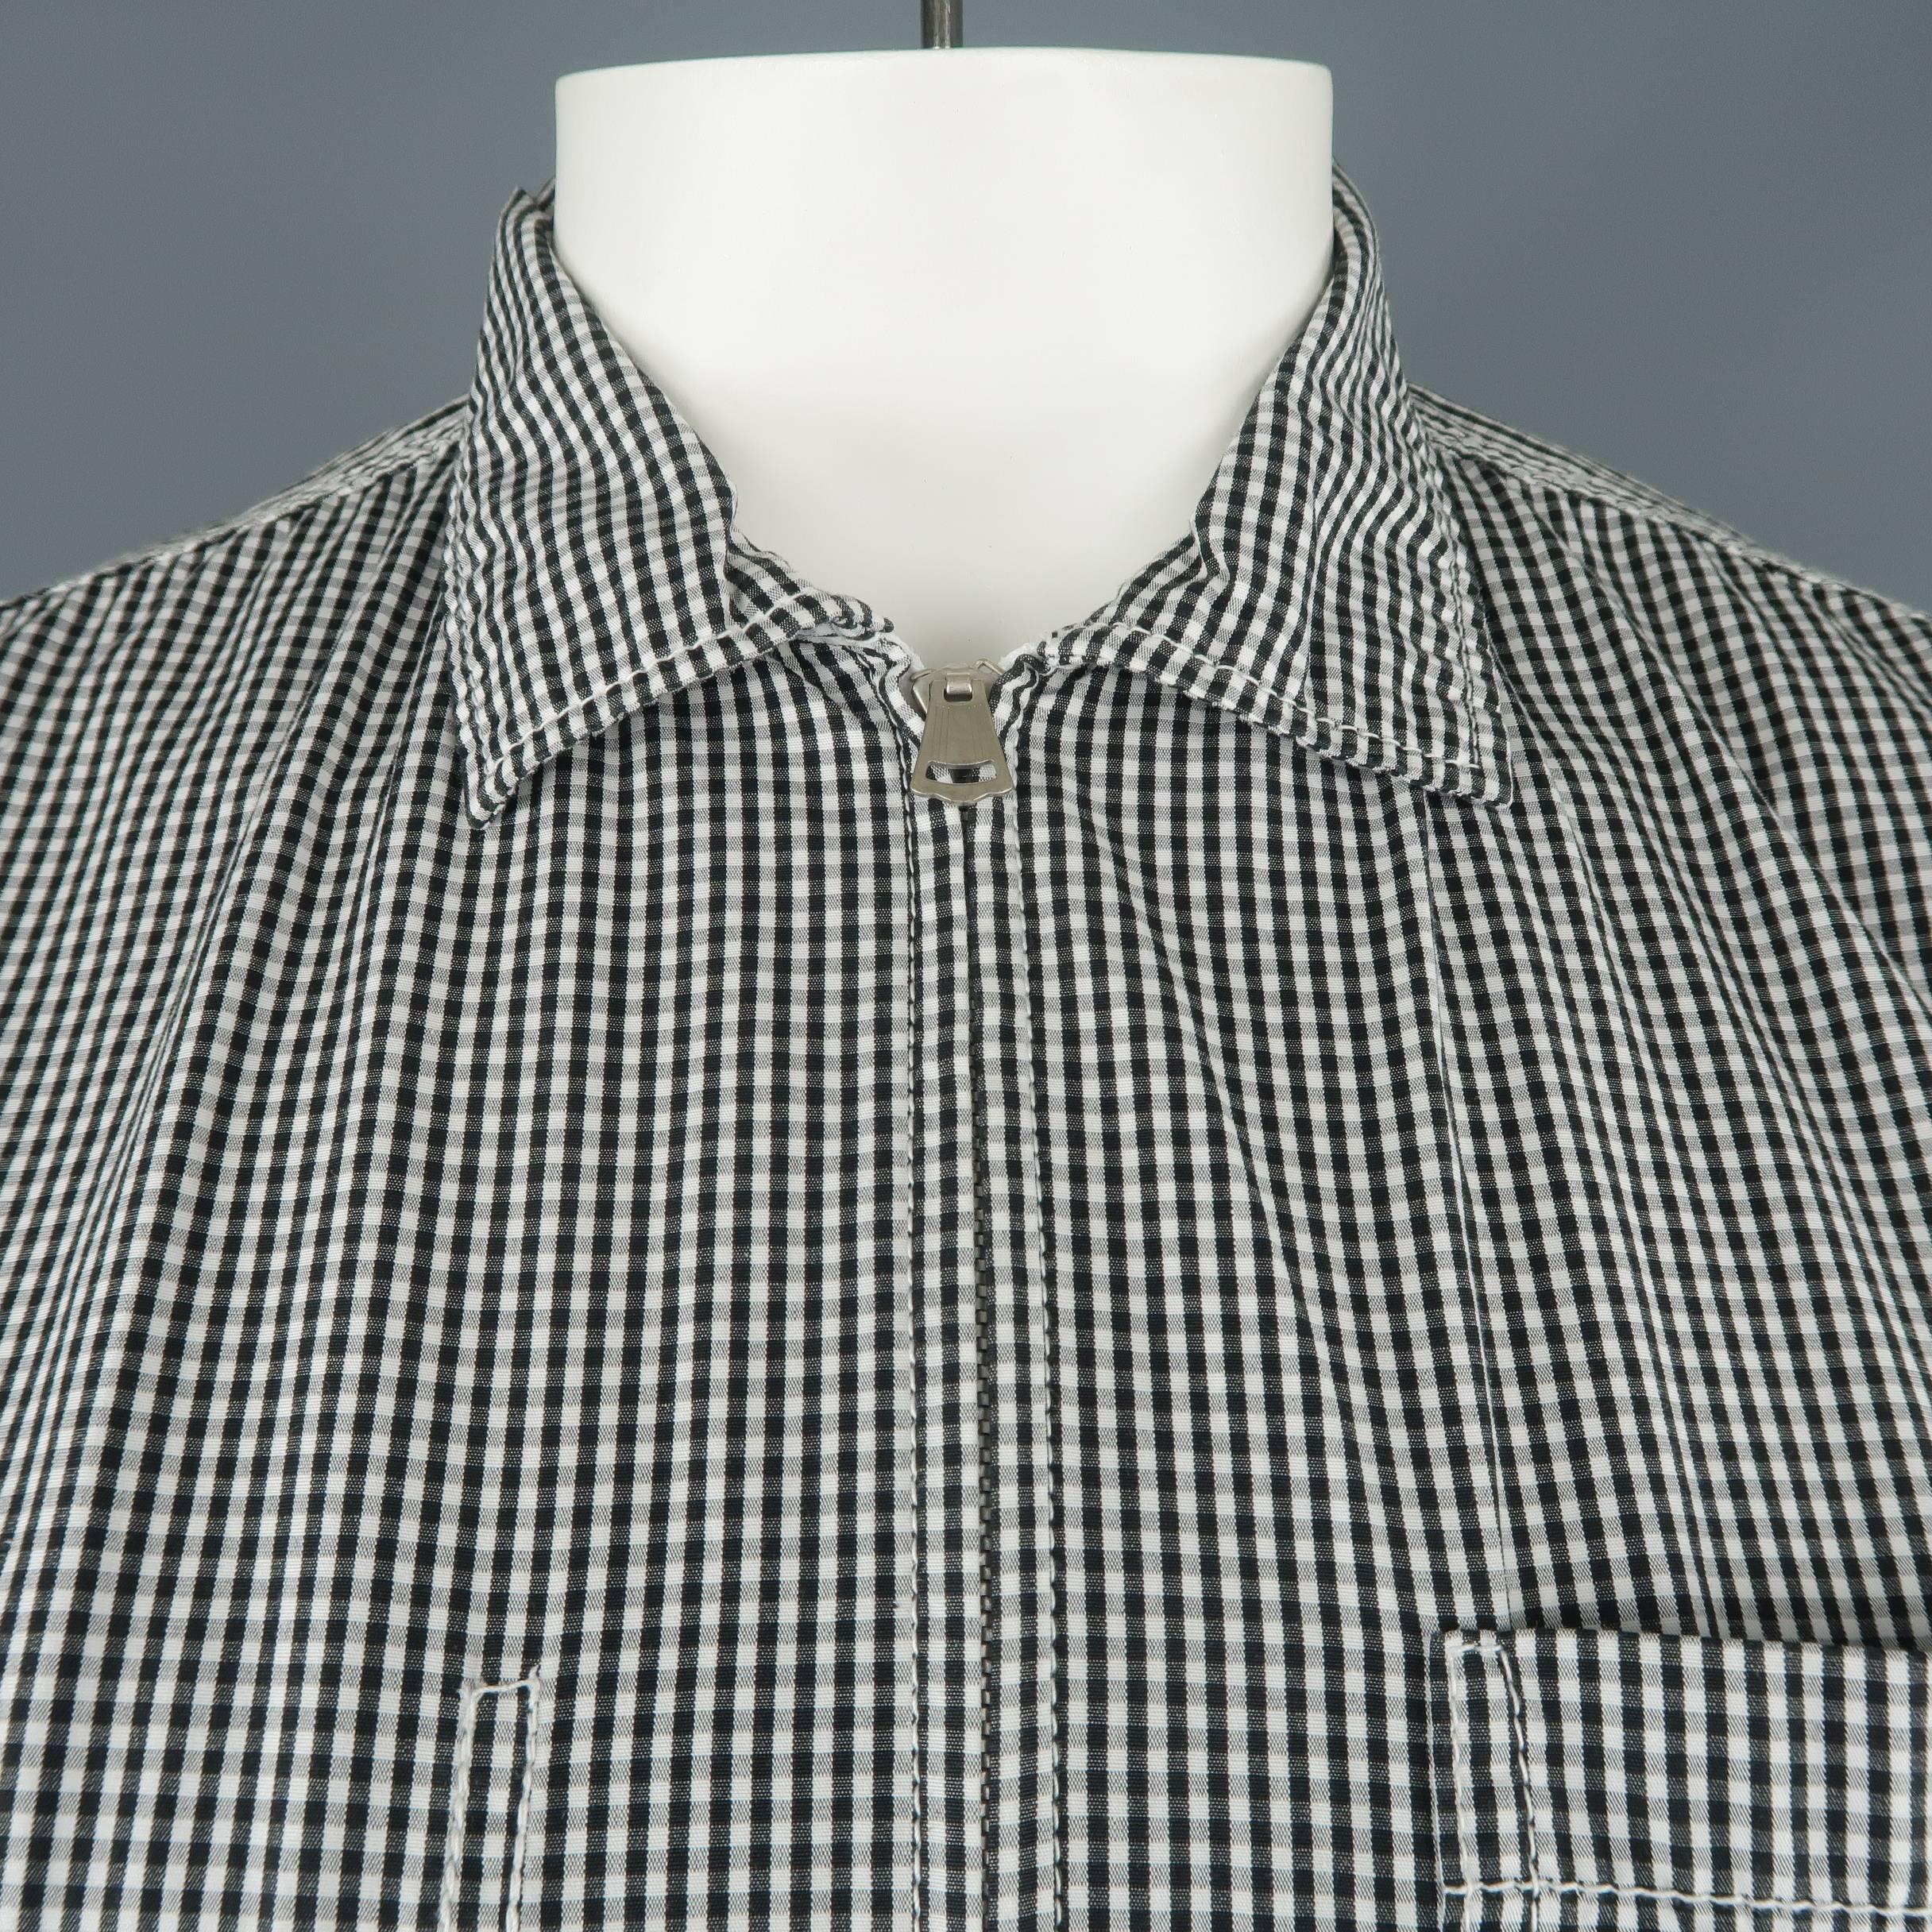 JUNYA WATANABE shirt comes in black and white gingham checkered plaid cotton with a pointed collar, patch pockets, and zip up front. Made in Japan.
 
Excellent Pre-Owned Condition.
Marked: L
 
Measurements:
 
Shoulder: 17 in.
Chest: 42 in.
Sleeve: